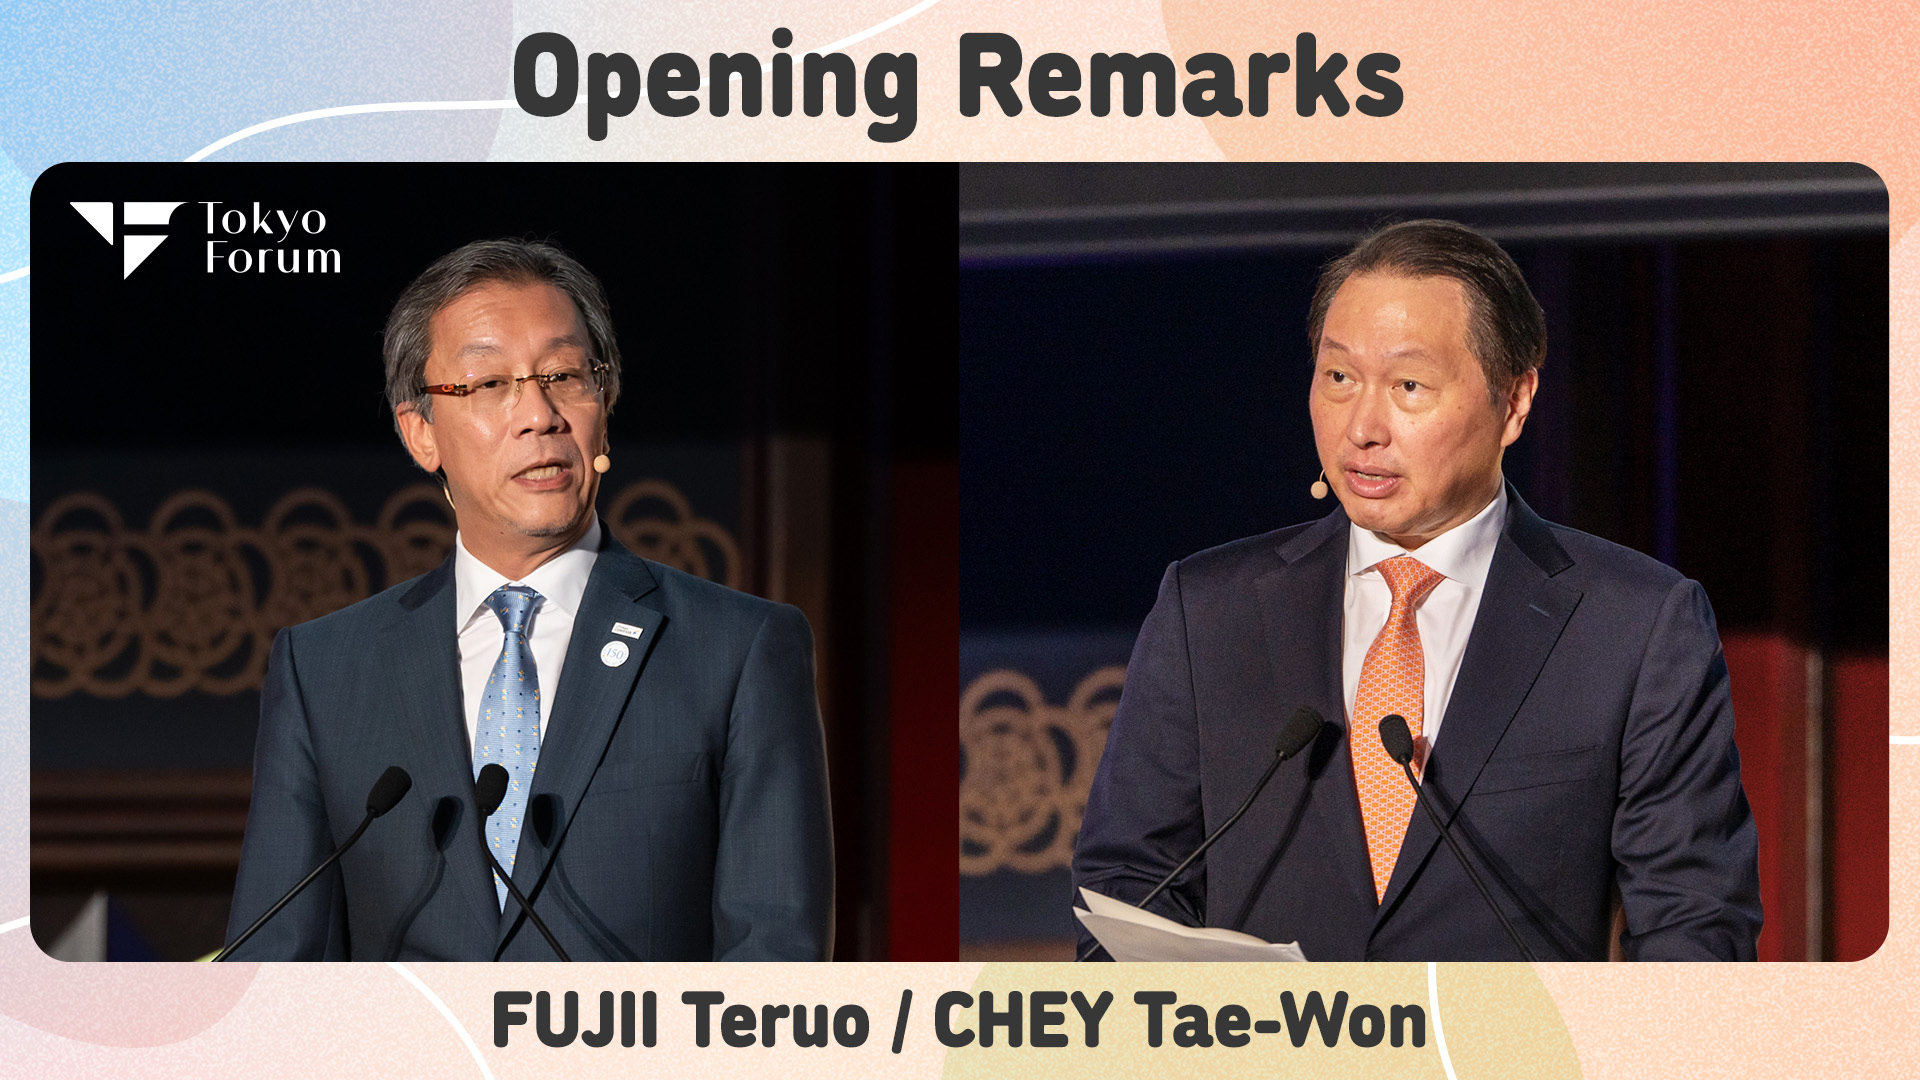 Day 1 | Opening Remarks by FUJII Teruo, CHEY Tae-Won